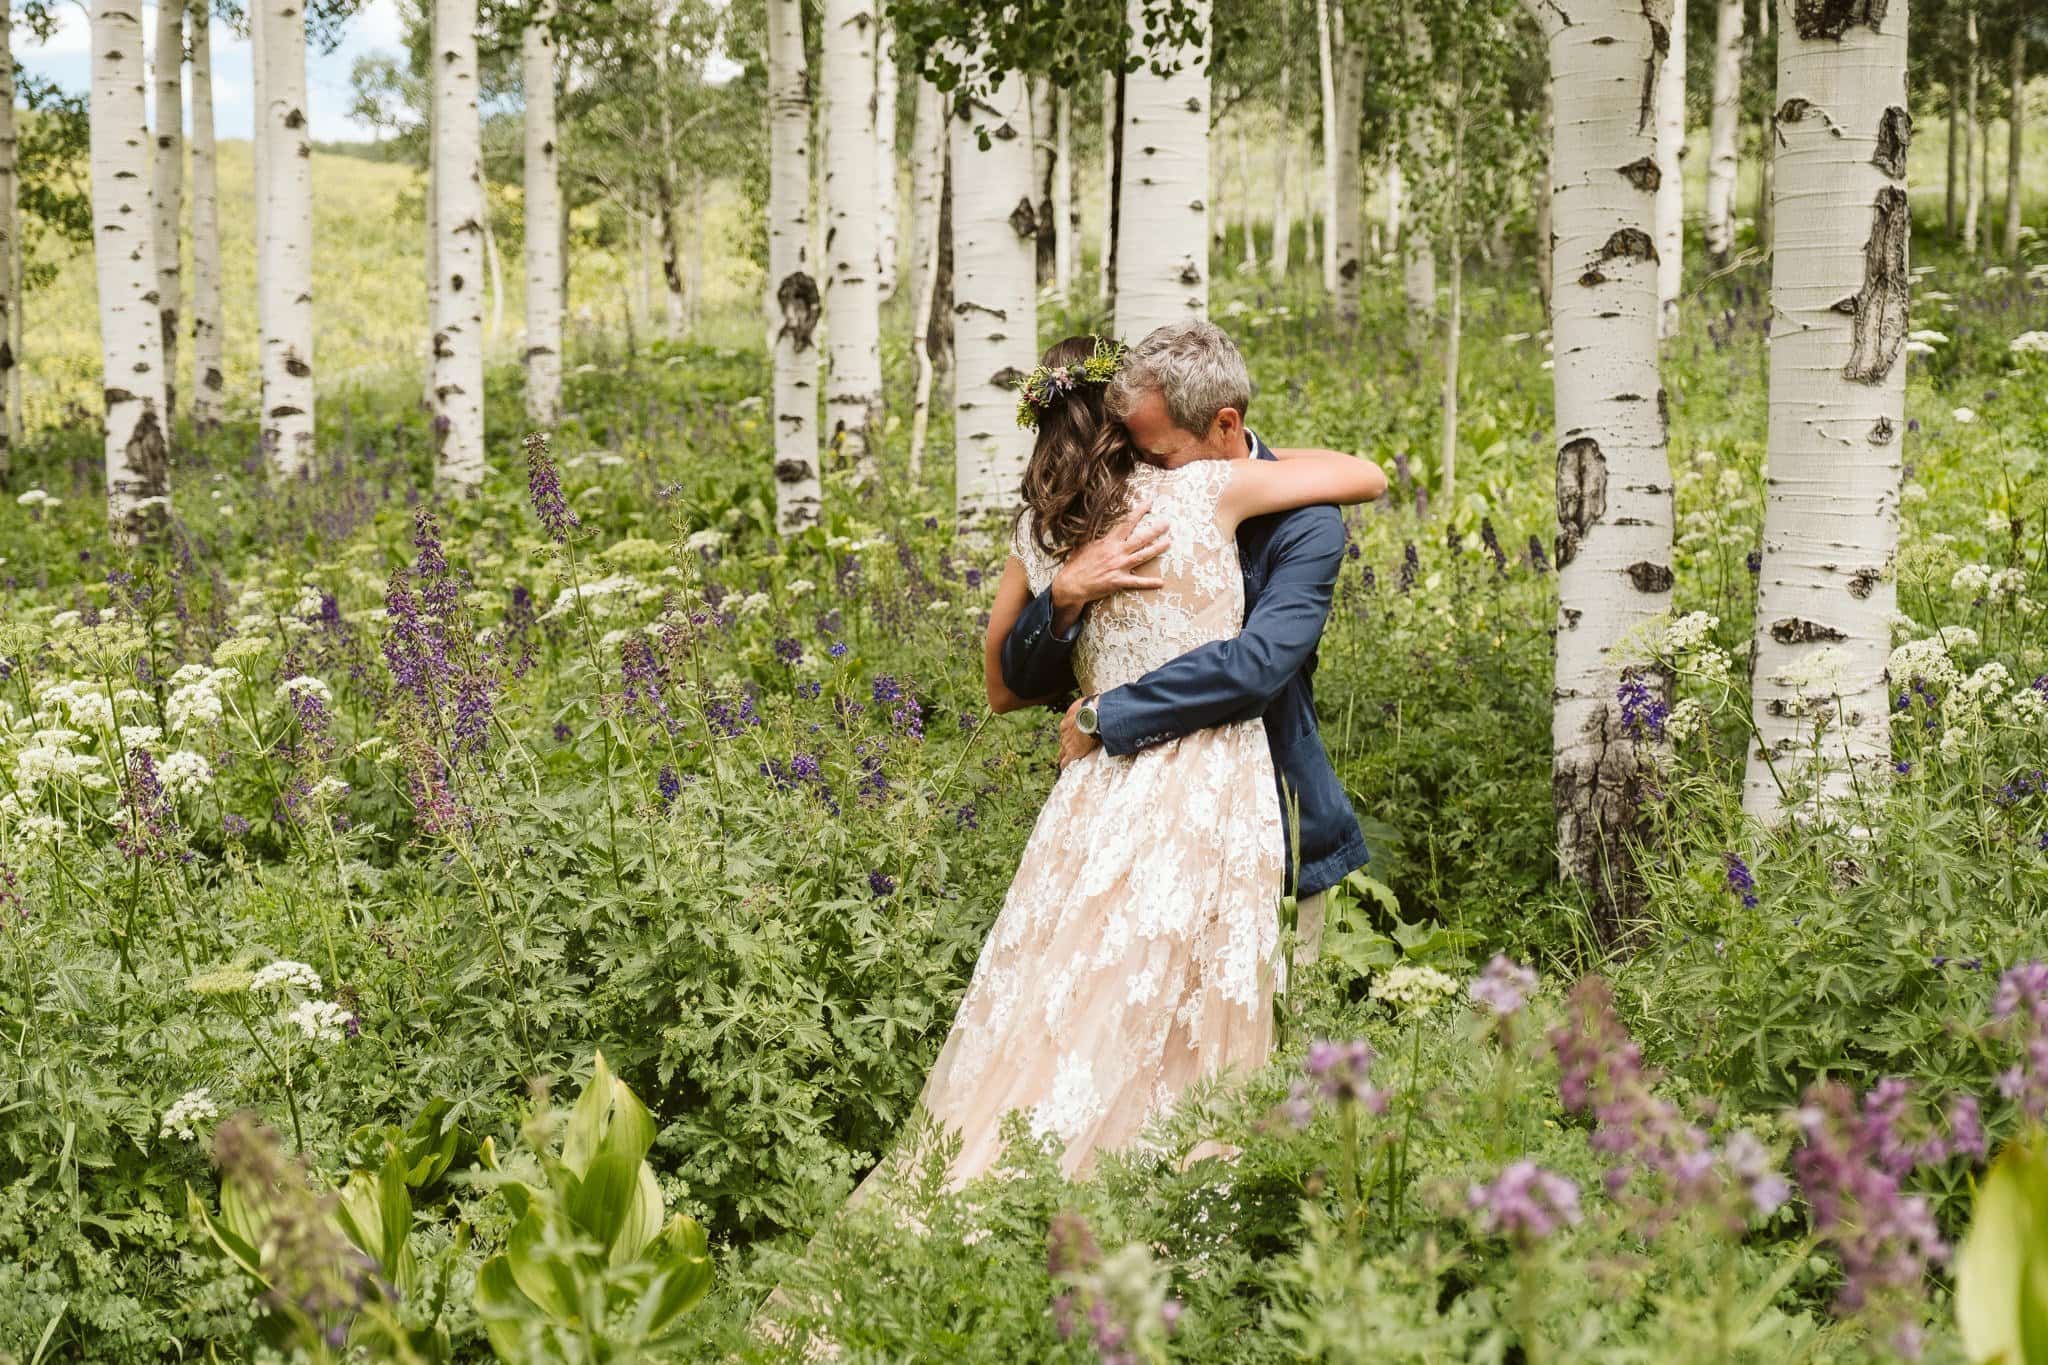 First look in Crested Butte aspen grove with wildflowers, Crested Butte wedding, Colorado wedding photographer